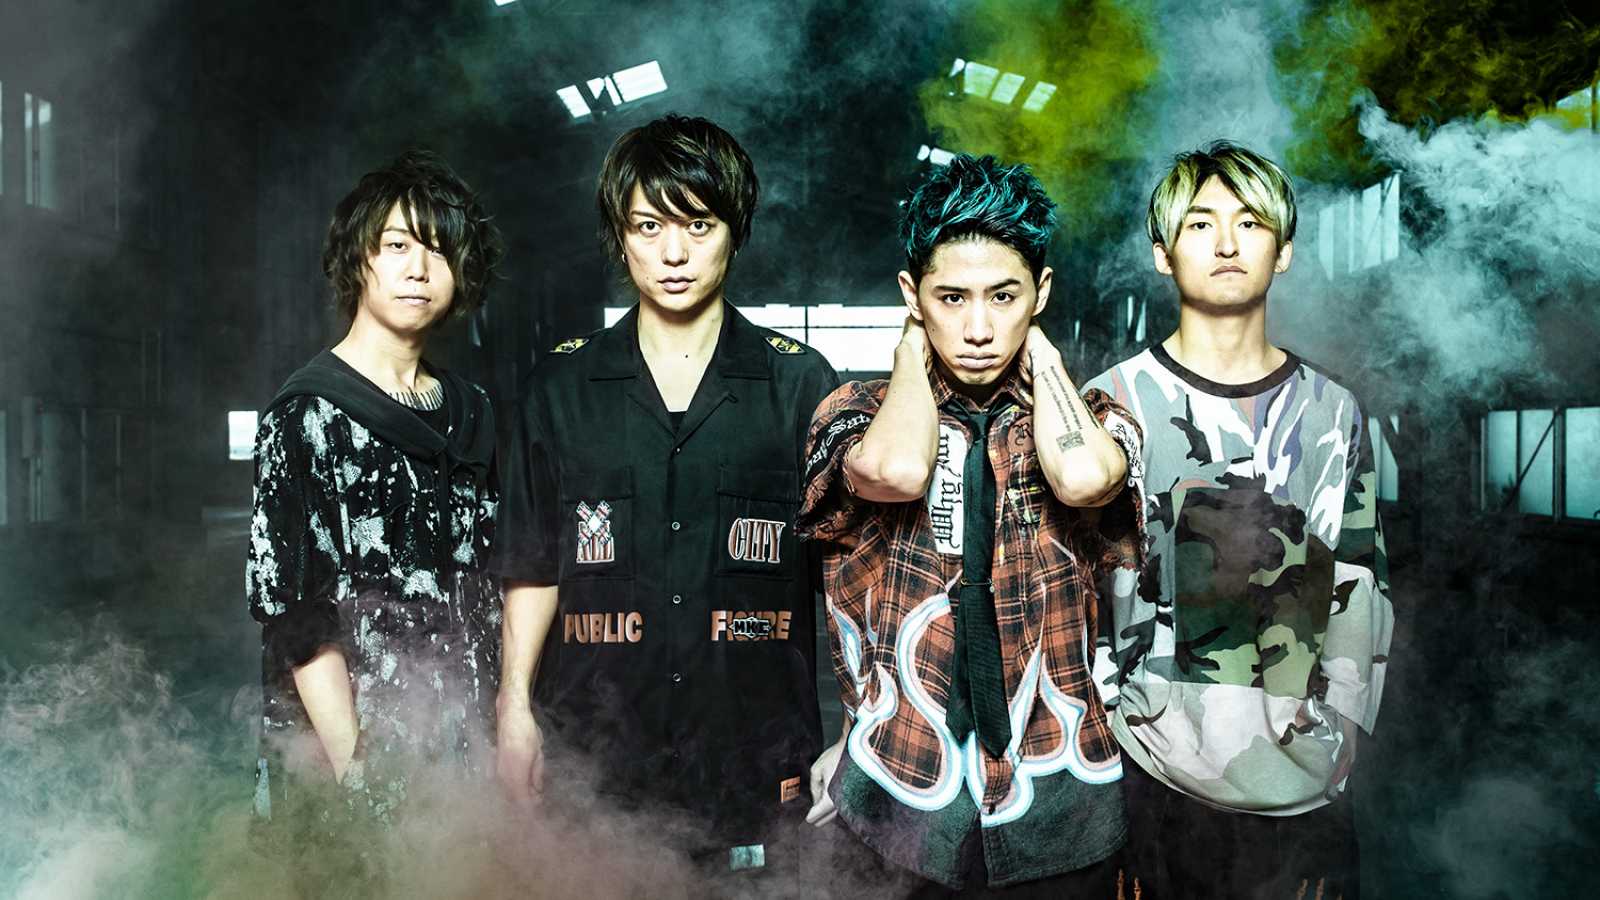 ONE OK ROCK anuncia a transmissão do show Field of Wonder © AMUSE INC. All rights reserved.